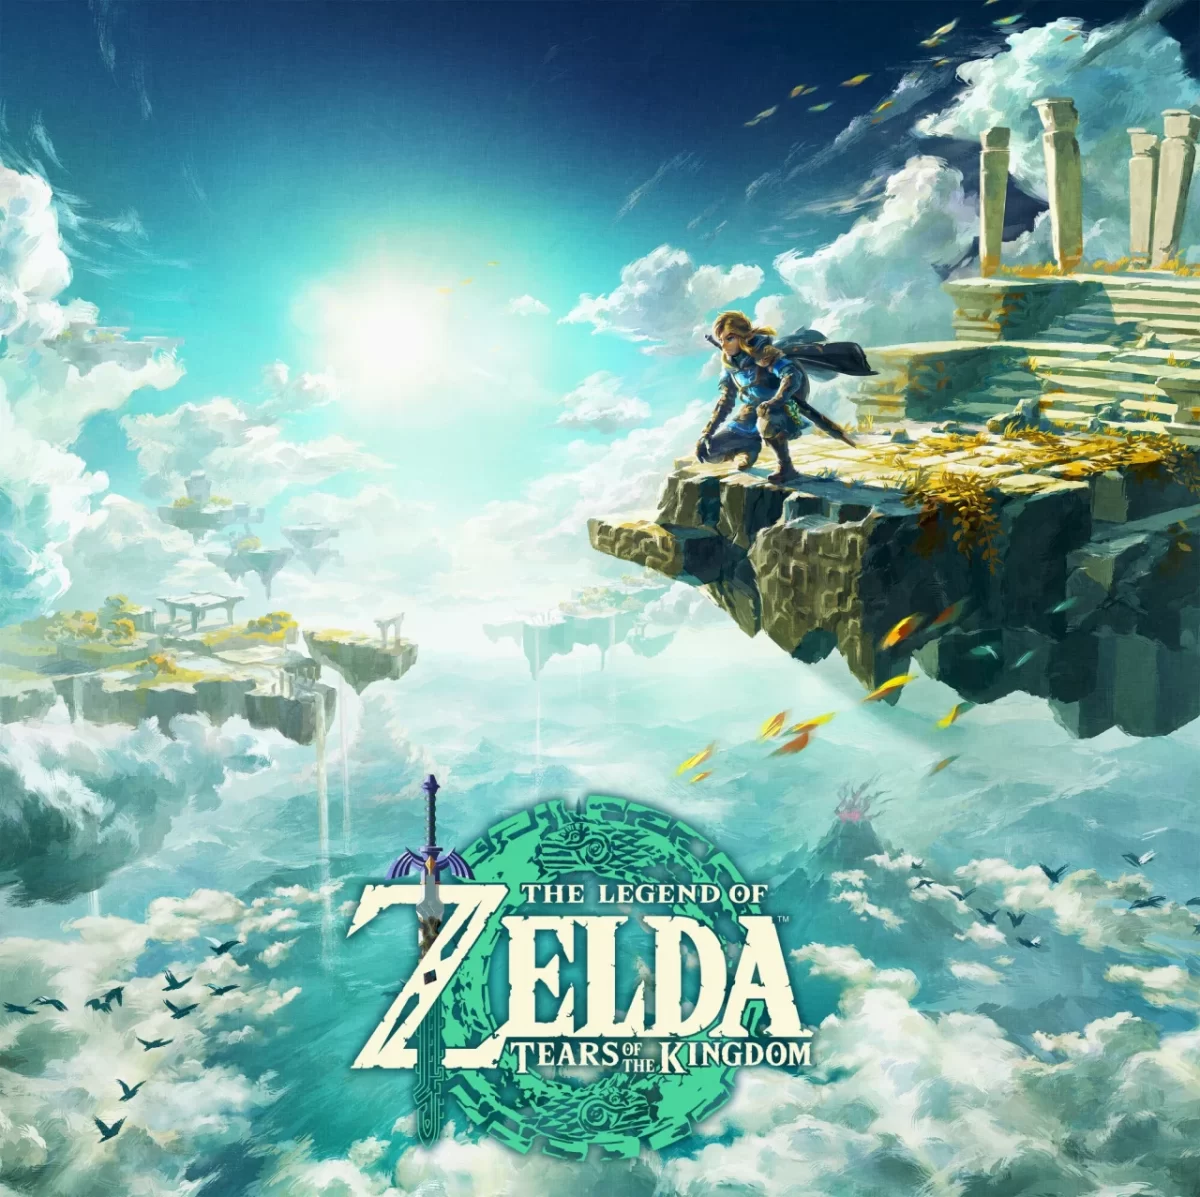 The Legend of Zelda: Tears of the Kingdom, sequel to The Legend of Zelda: Breath of the Wild is an amazing game with plenty of things to do and places to explore.